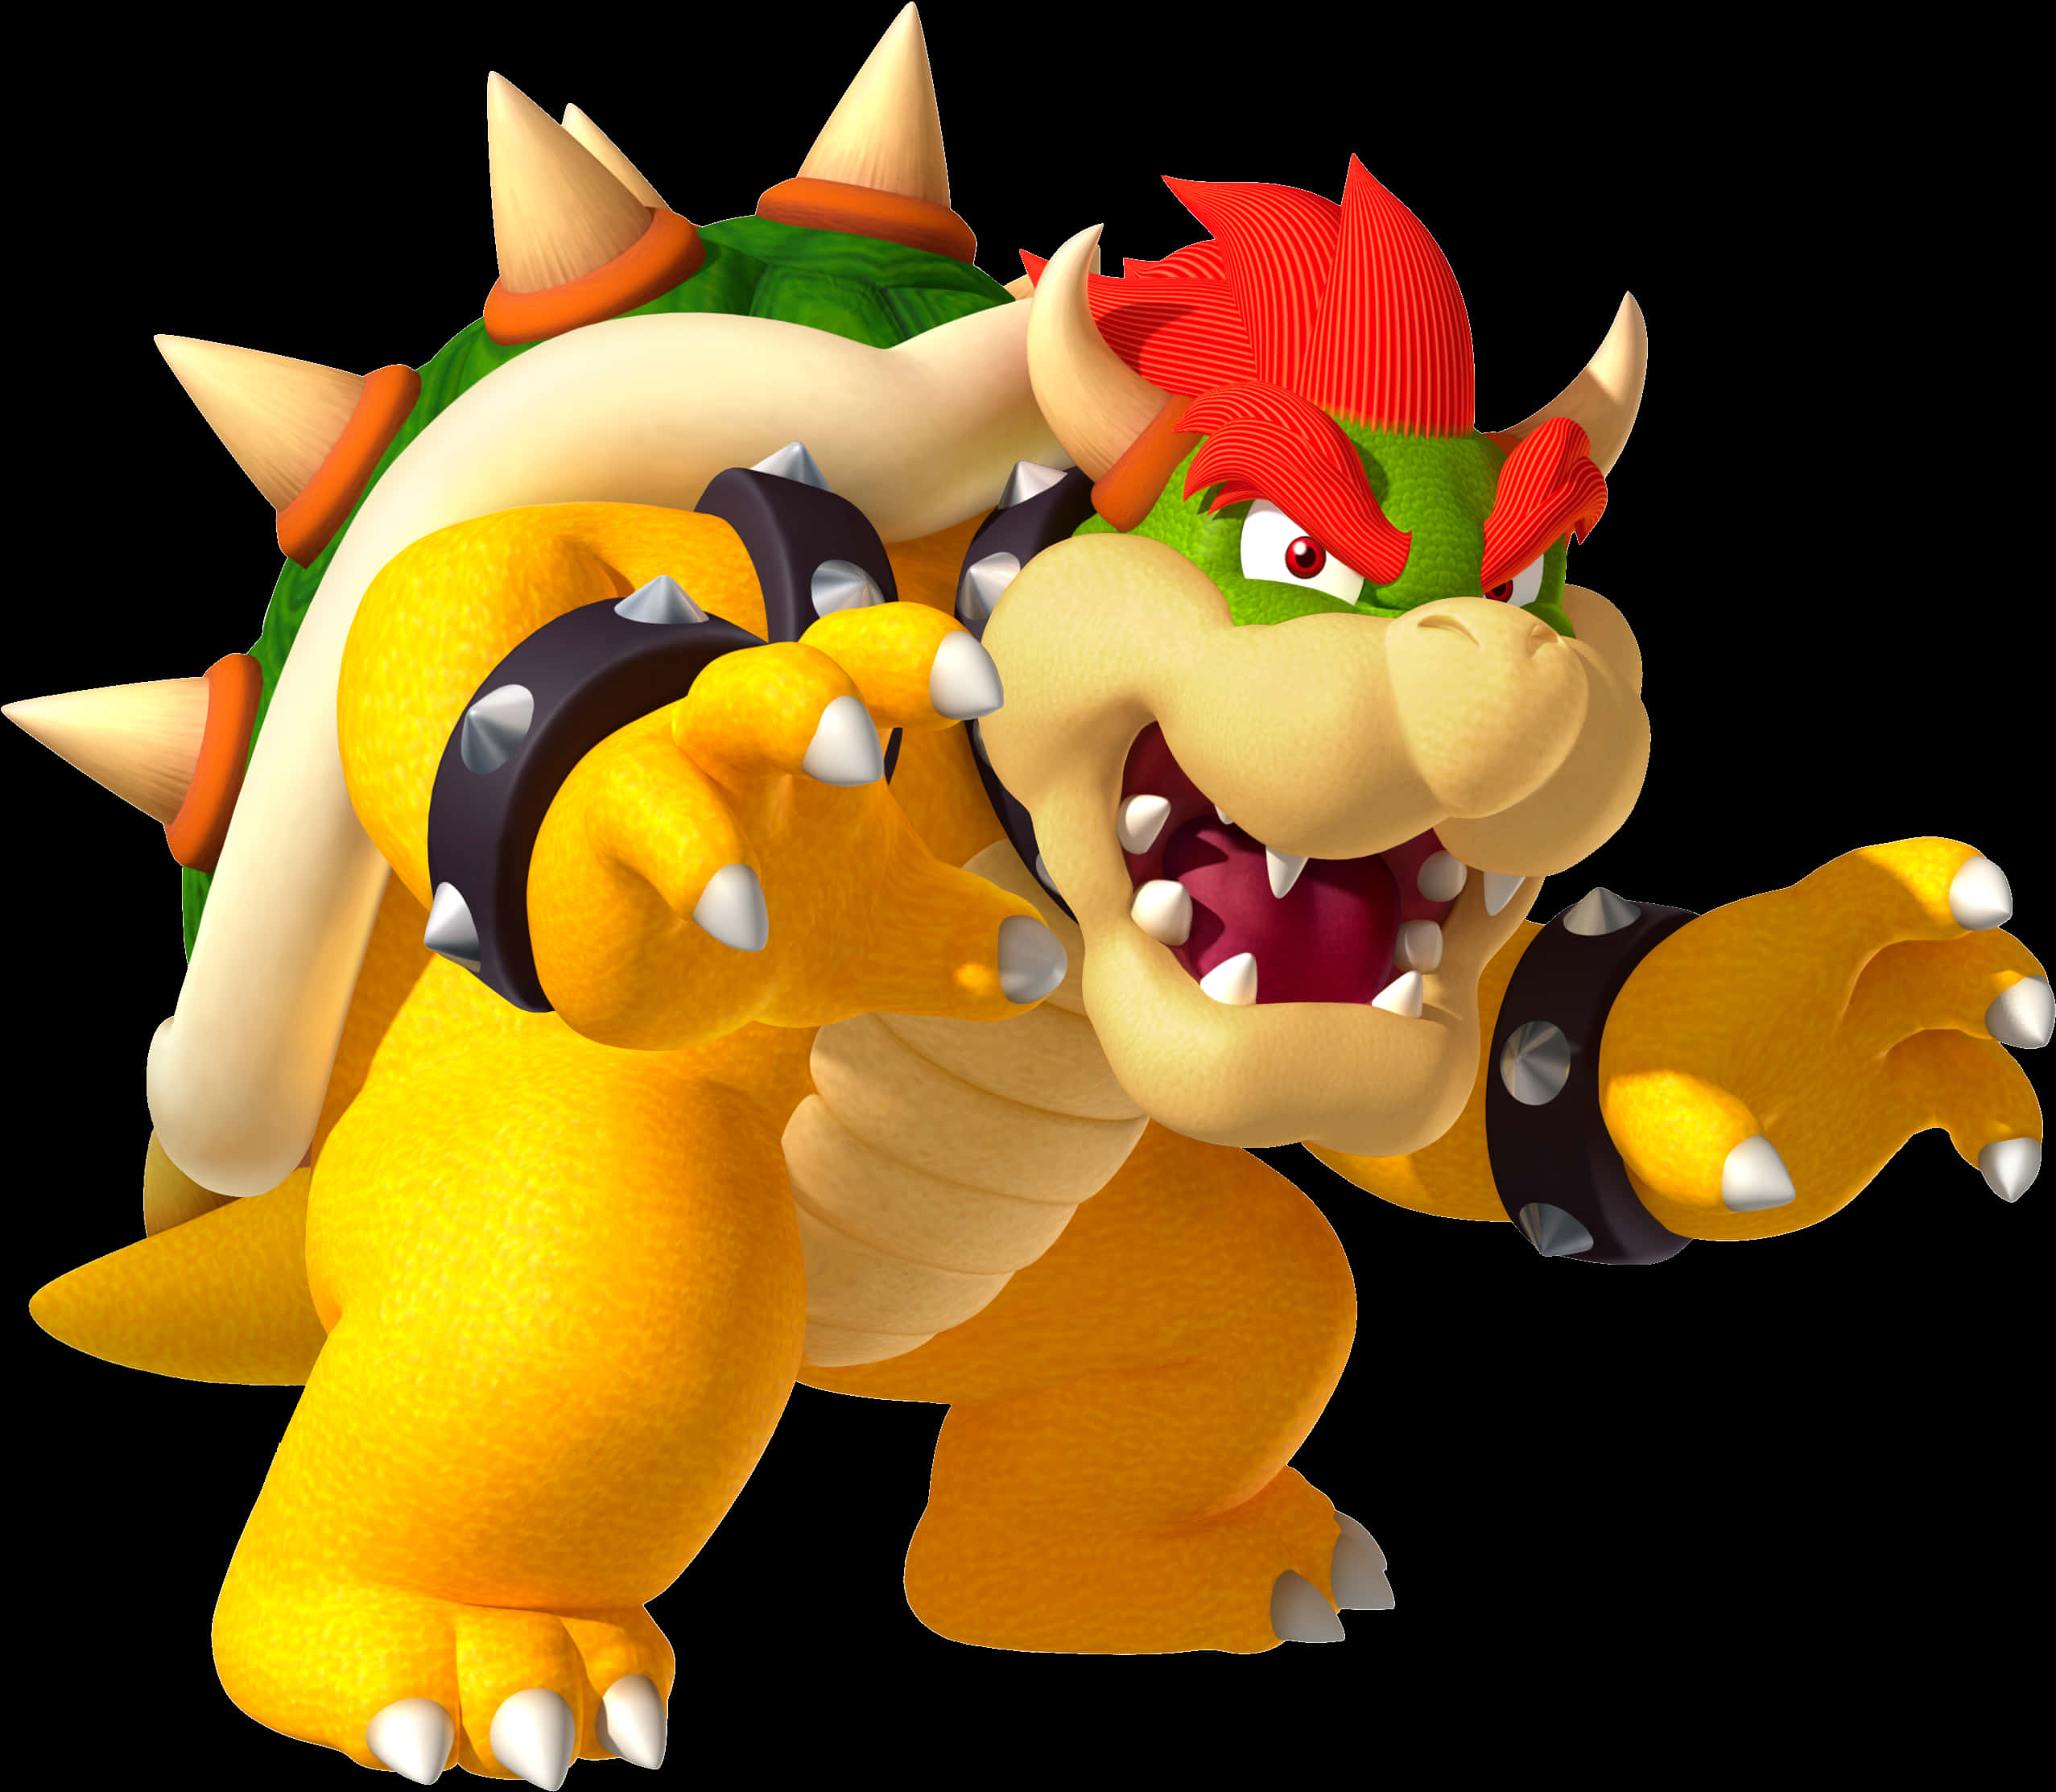 A Cartoon Character Of A Yellow Animal With Spikes And A Red And Green Shell